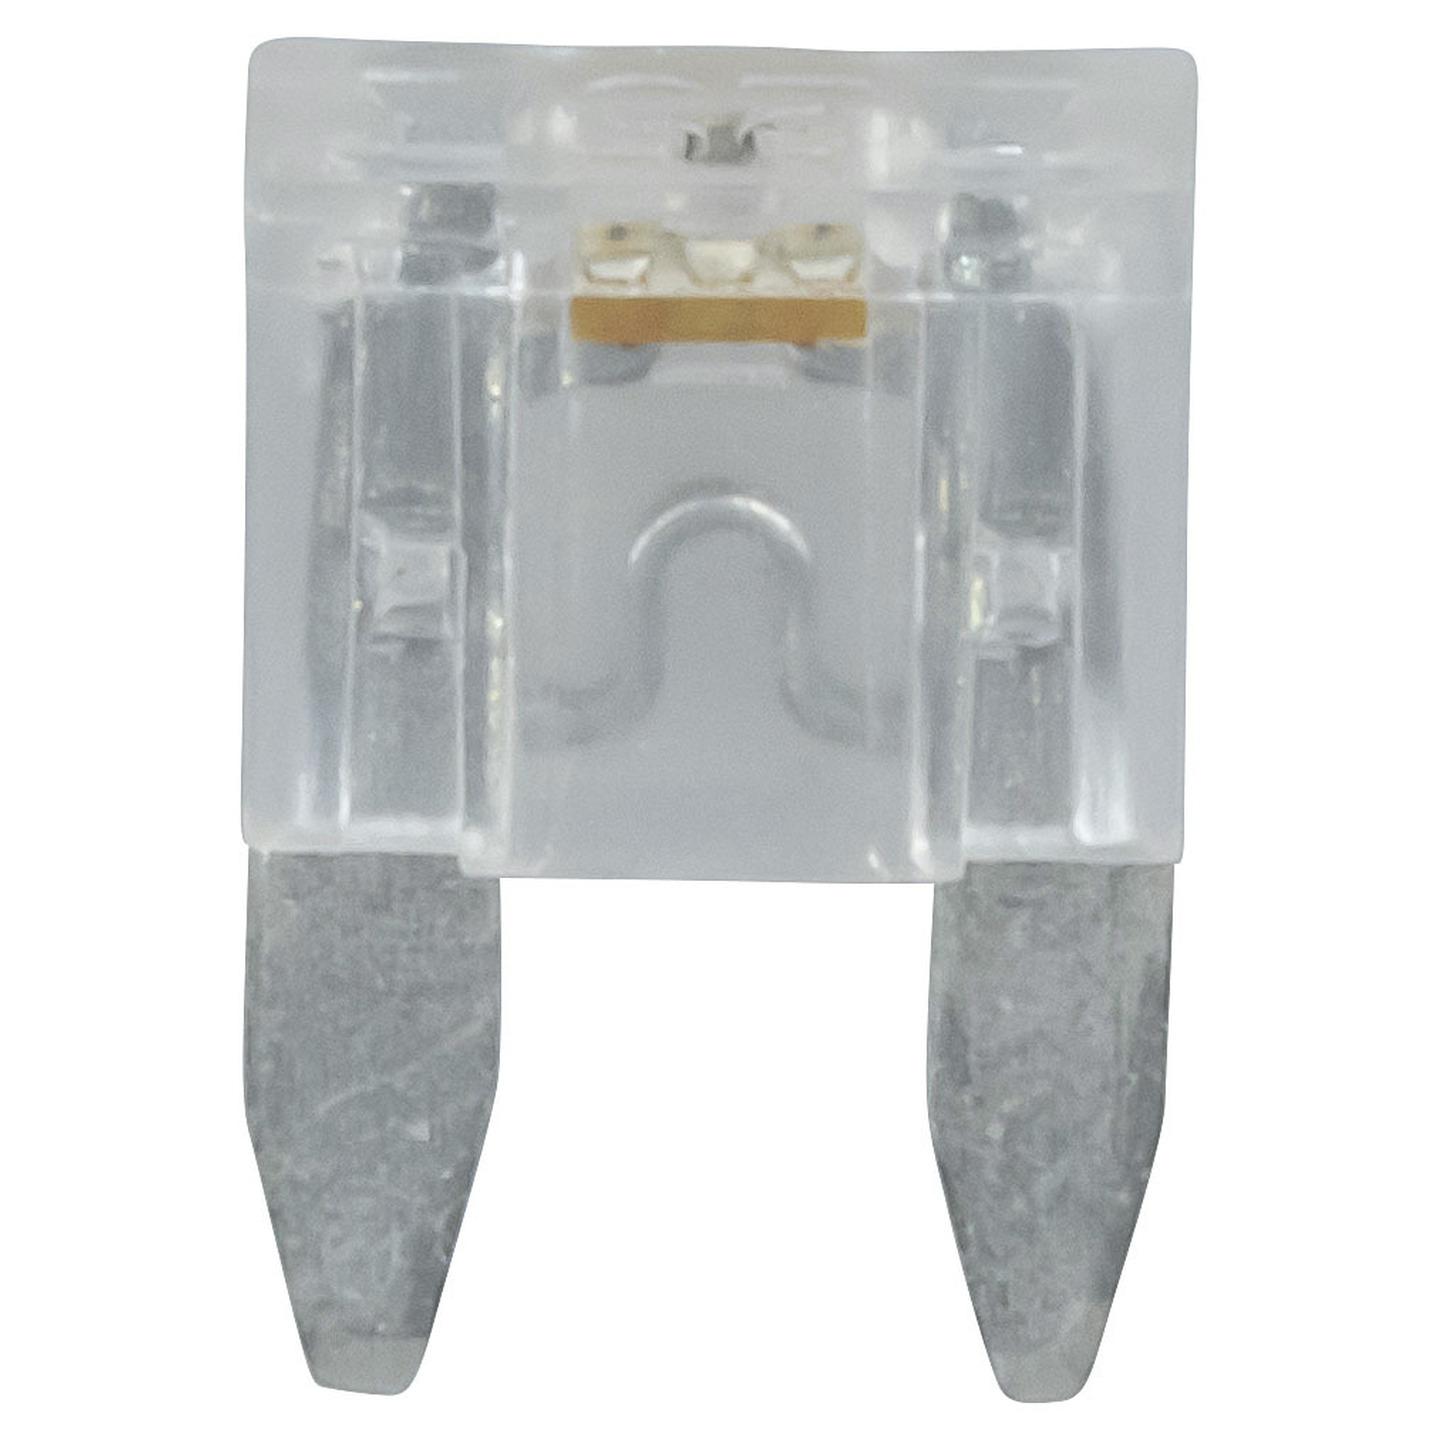 25A Clear Mini Blade Fuse with LED Indicator